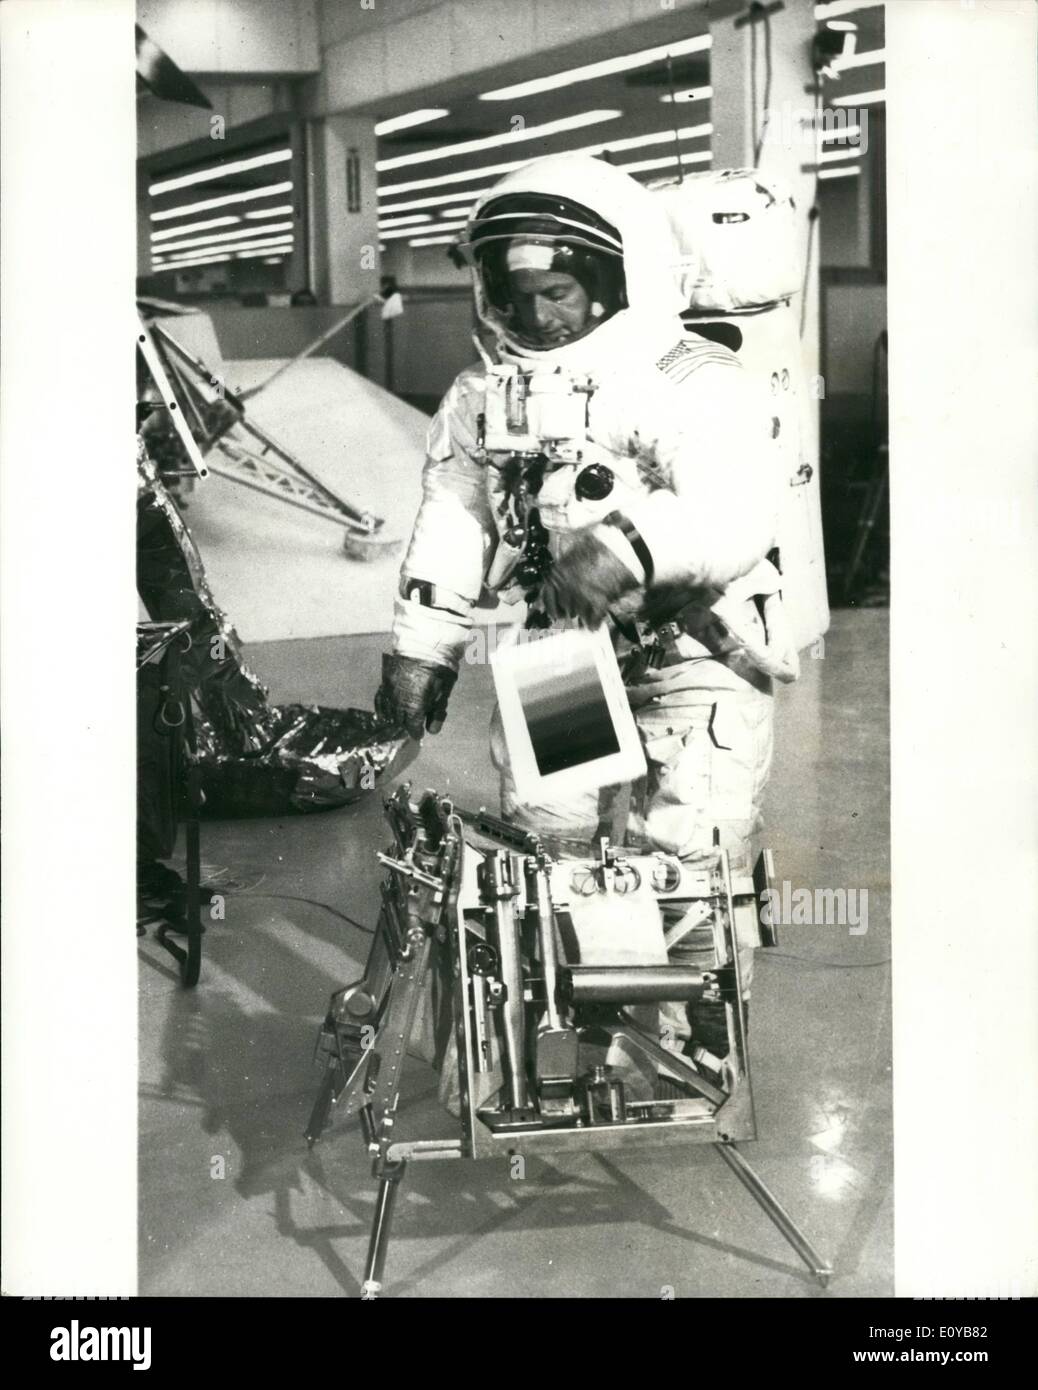 Oct. 10, 1969 - Preparing for Appolo 12 Lunar Mission. Apollo 12 commander Charles Conrad unstows lunar surface exploration equipment from the Lunar Module's Modular Equipment Stowage Bay (MESA) during a recent simulation of Apollo 12 Lunar surface activity at the Spaceport's Flight Crew Training Building at Kennedy Space Centre, Florida. Stock Photo